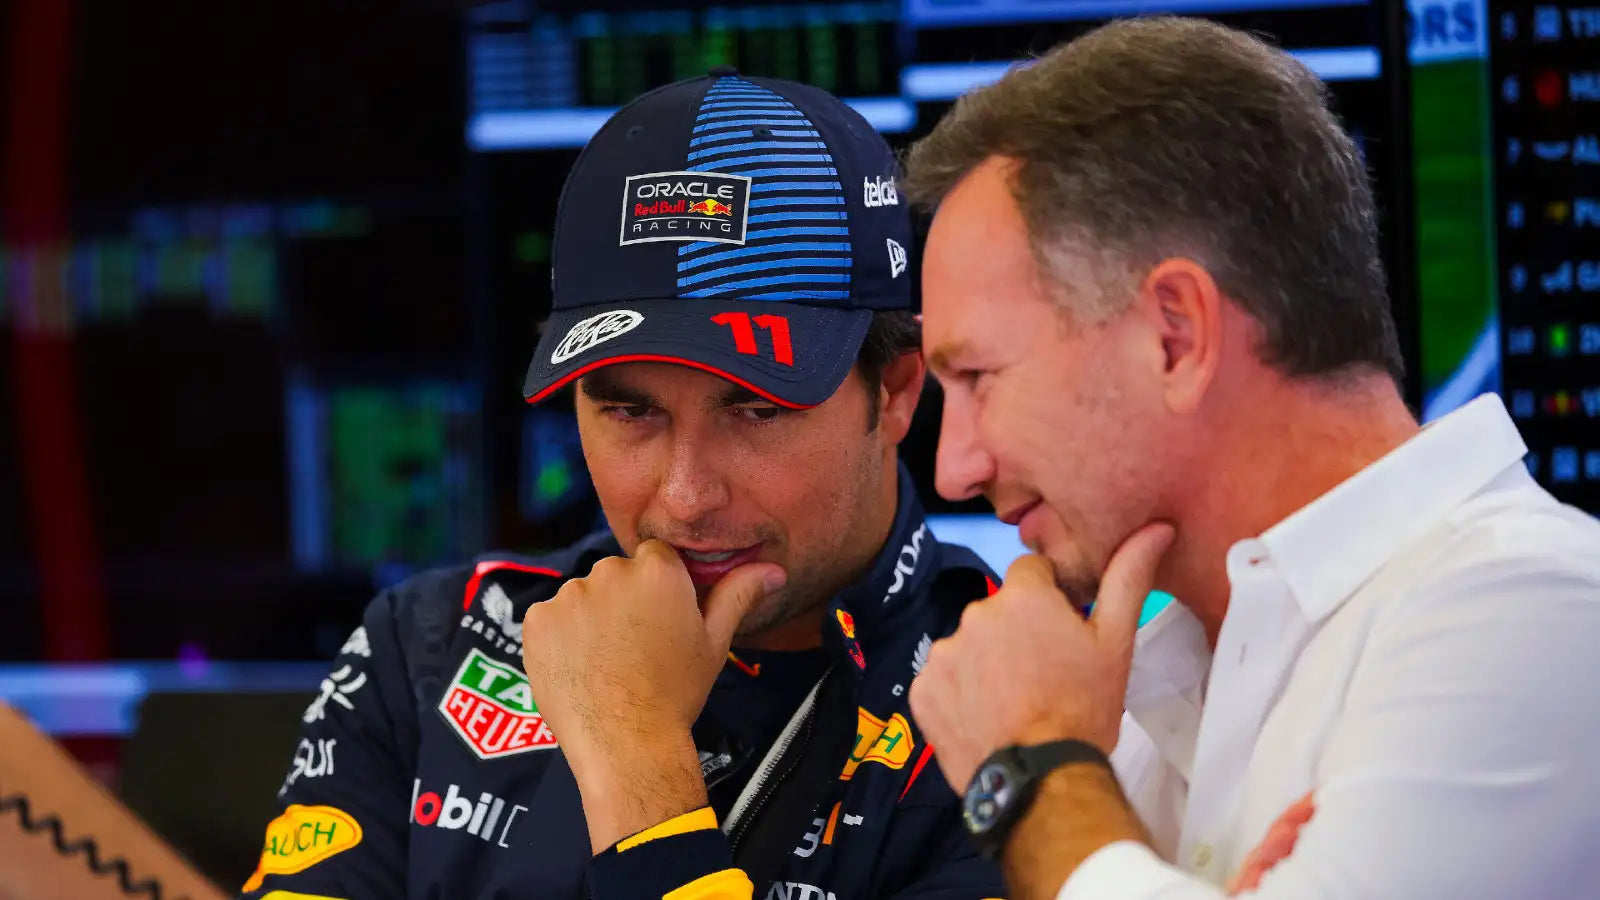 Christian Horner quizzed on Red Bull ‘criteria’ for Sergio Perez to keep seat